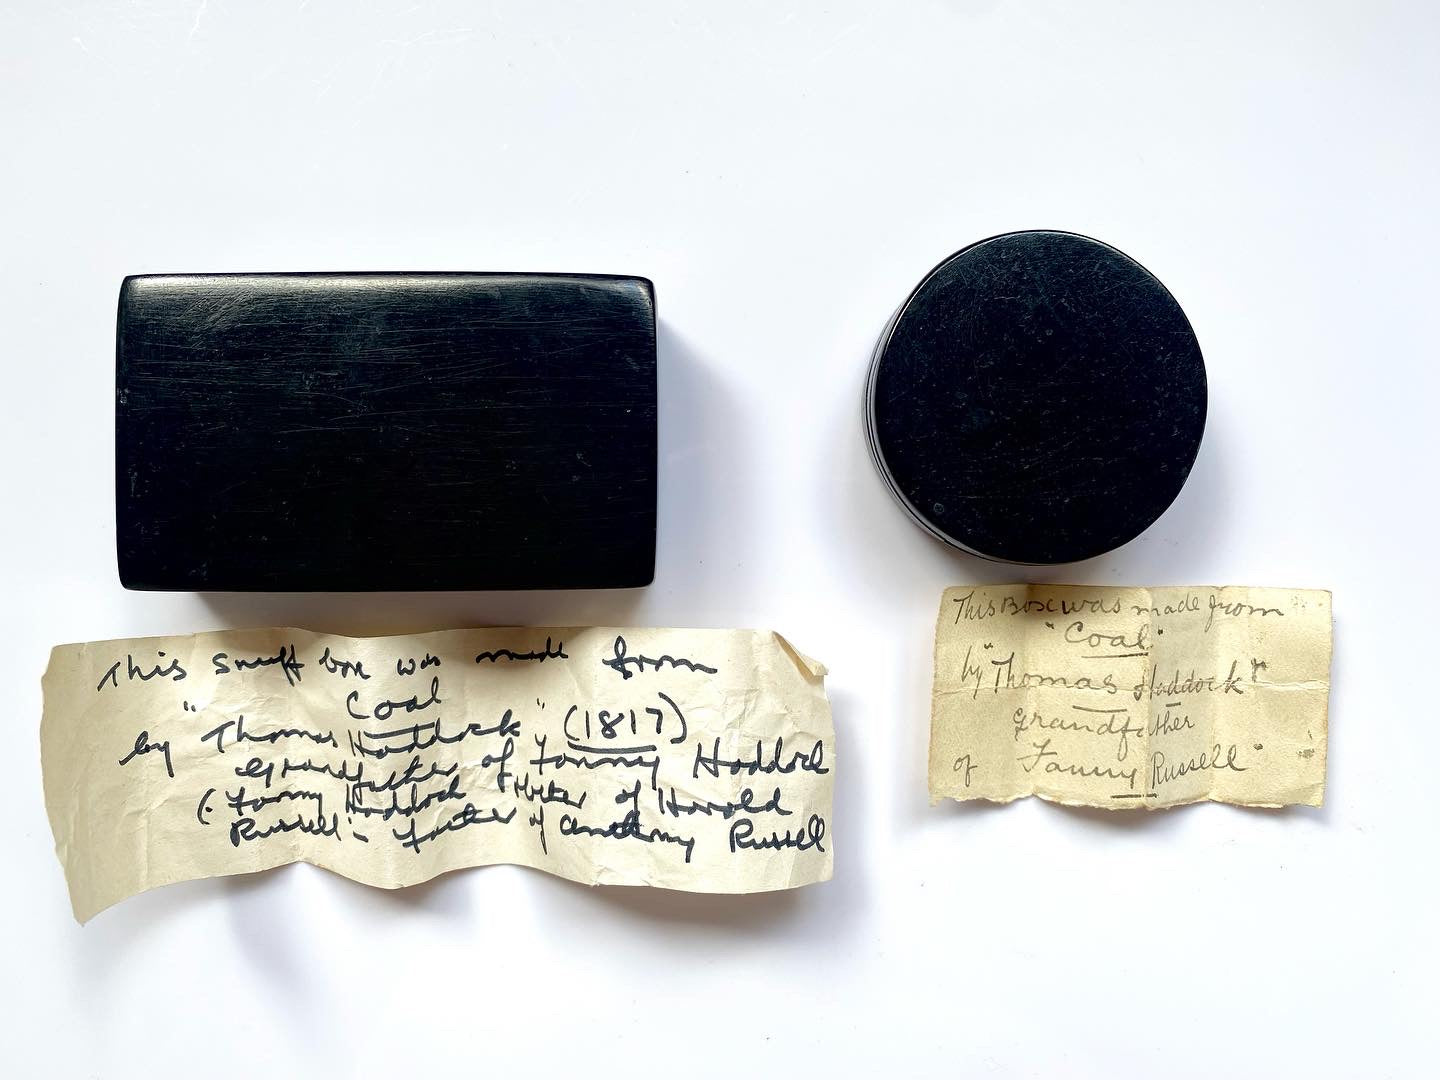 Charming Pair Of Cannel Coal Snuff Boxes With Provenance Of Maker And Date 1817 - Source Vintage